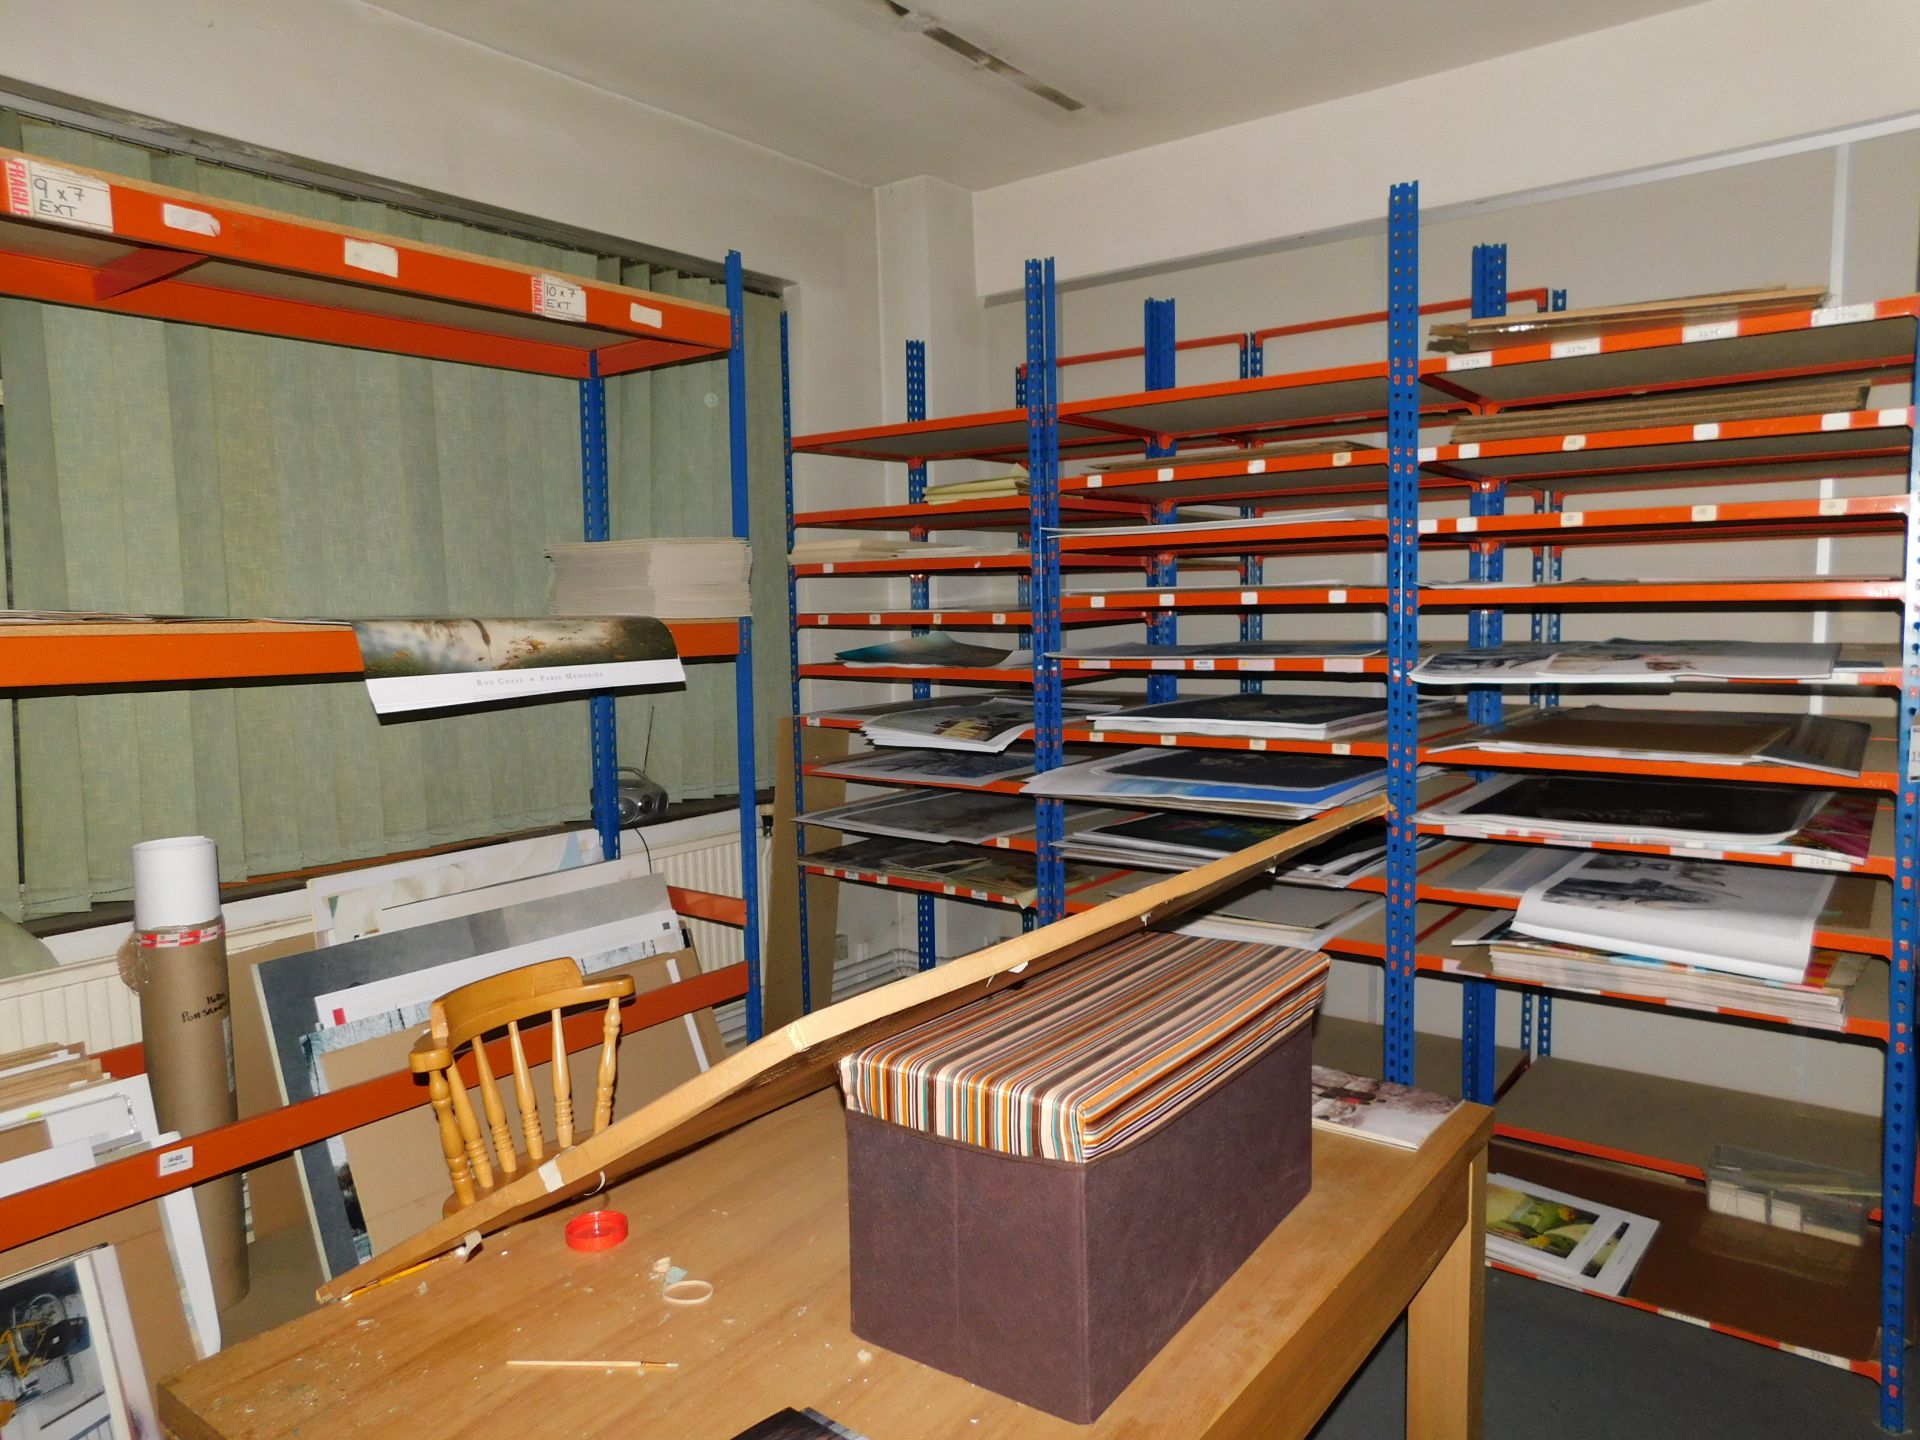 3 Bays of Multi-Tiered Shelving & 3 Bays of Heavy Duty Shelving (Collection – Thursday 31st May)